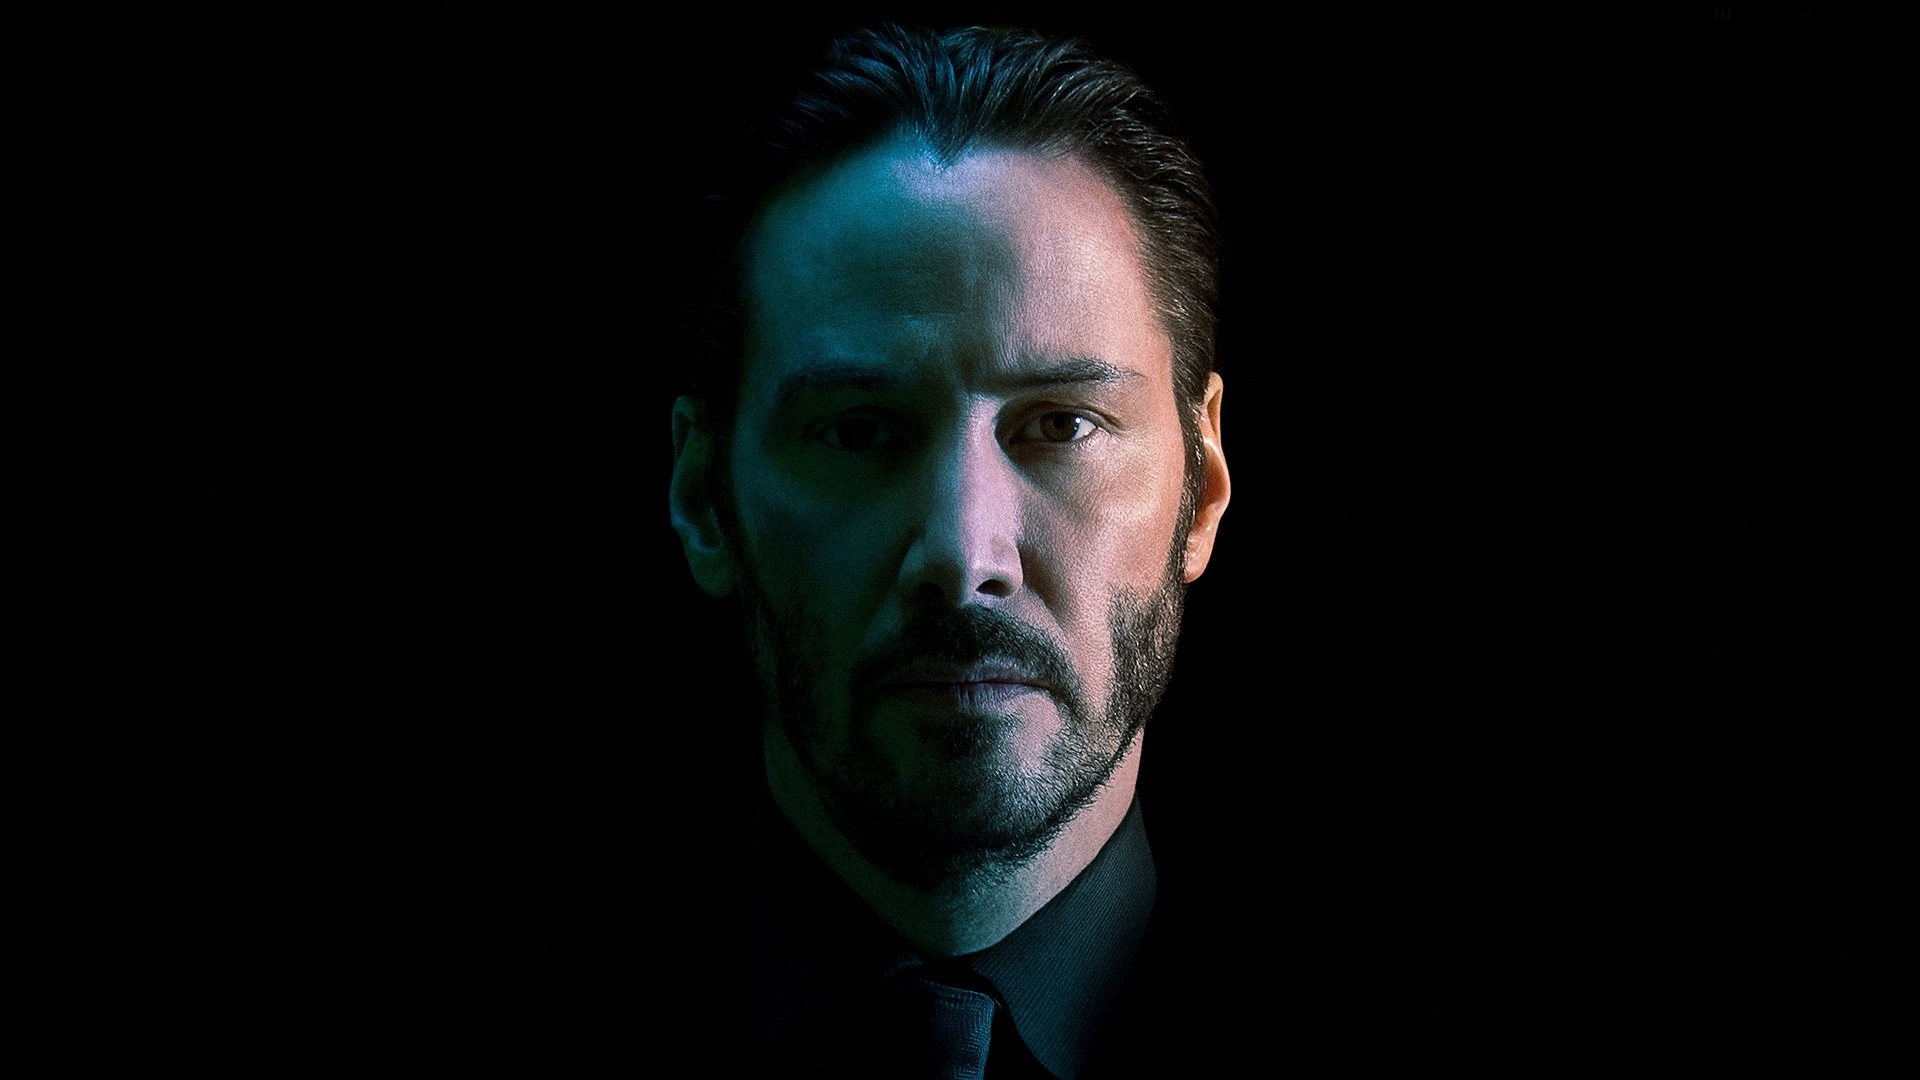 John Wick Hd Images Hot Sex Picture